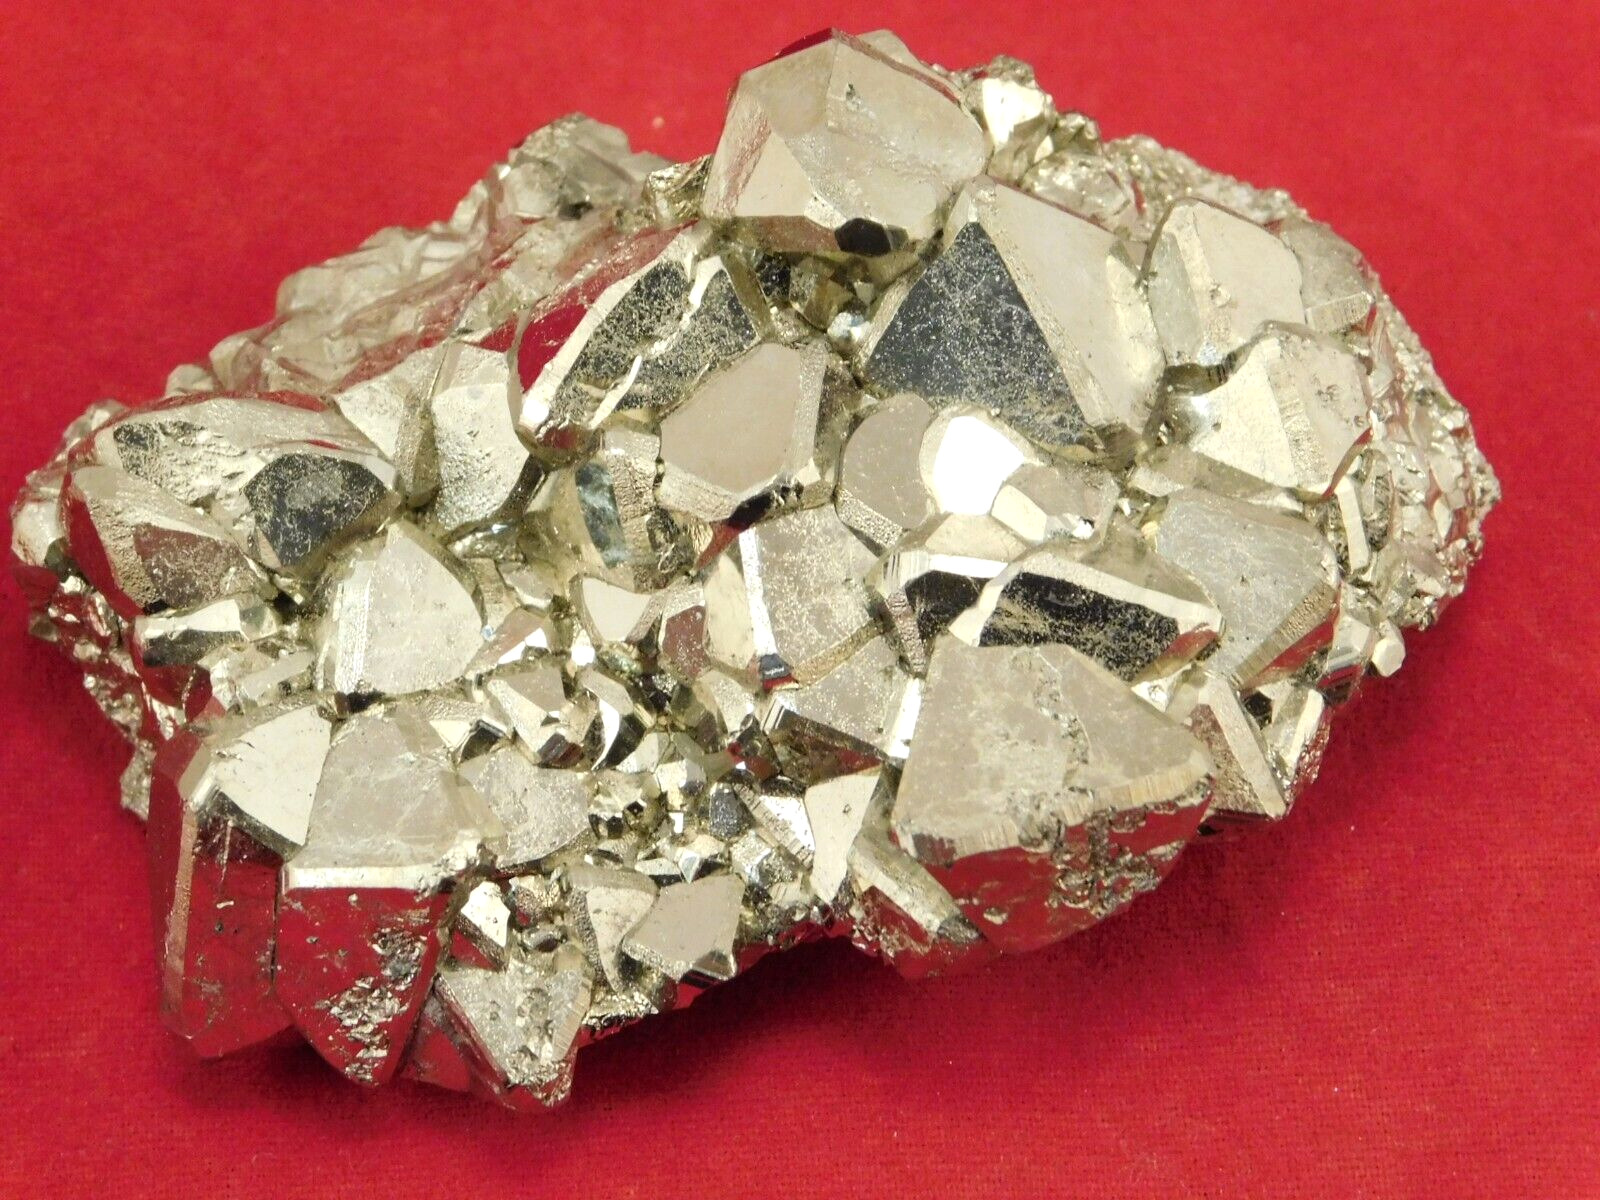 PYRAMID Shaped Crystals Tetrahedron PYRITE Crystal Cluster From Peru 165gr